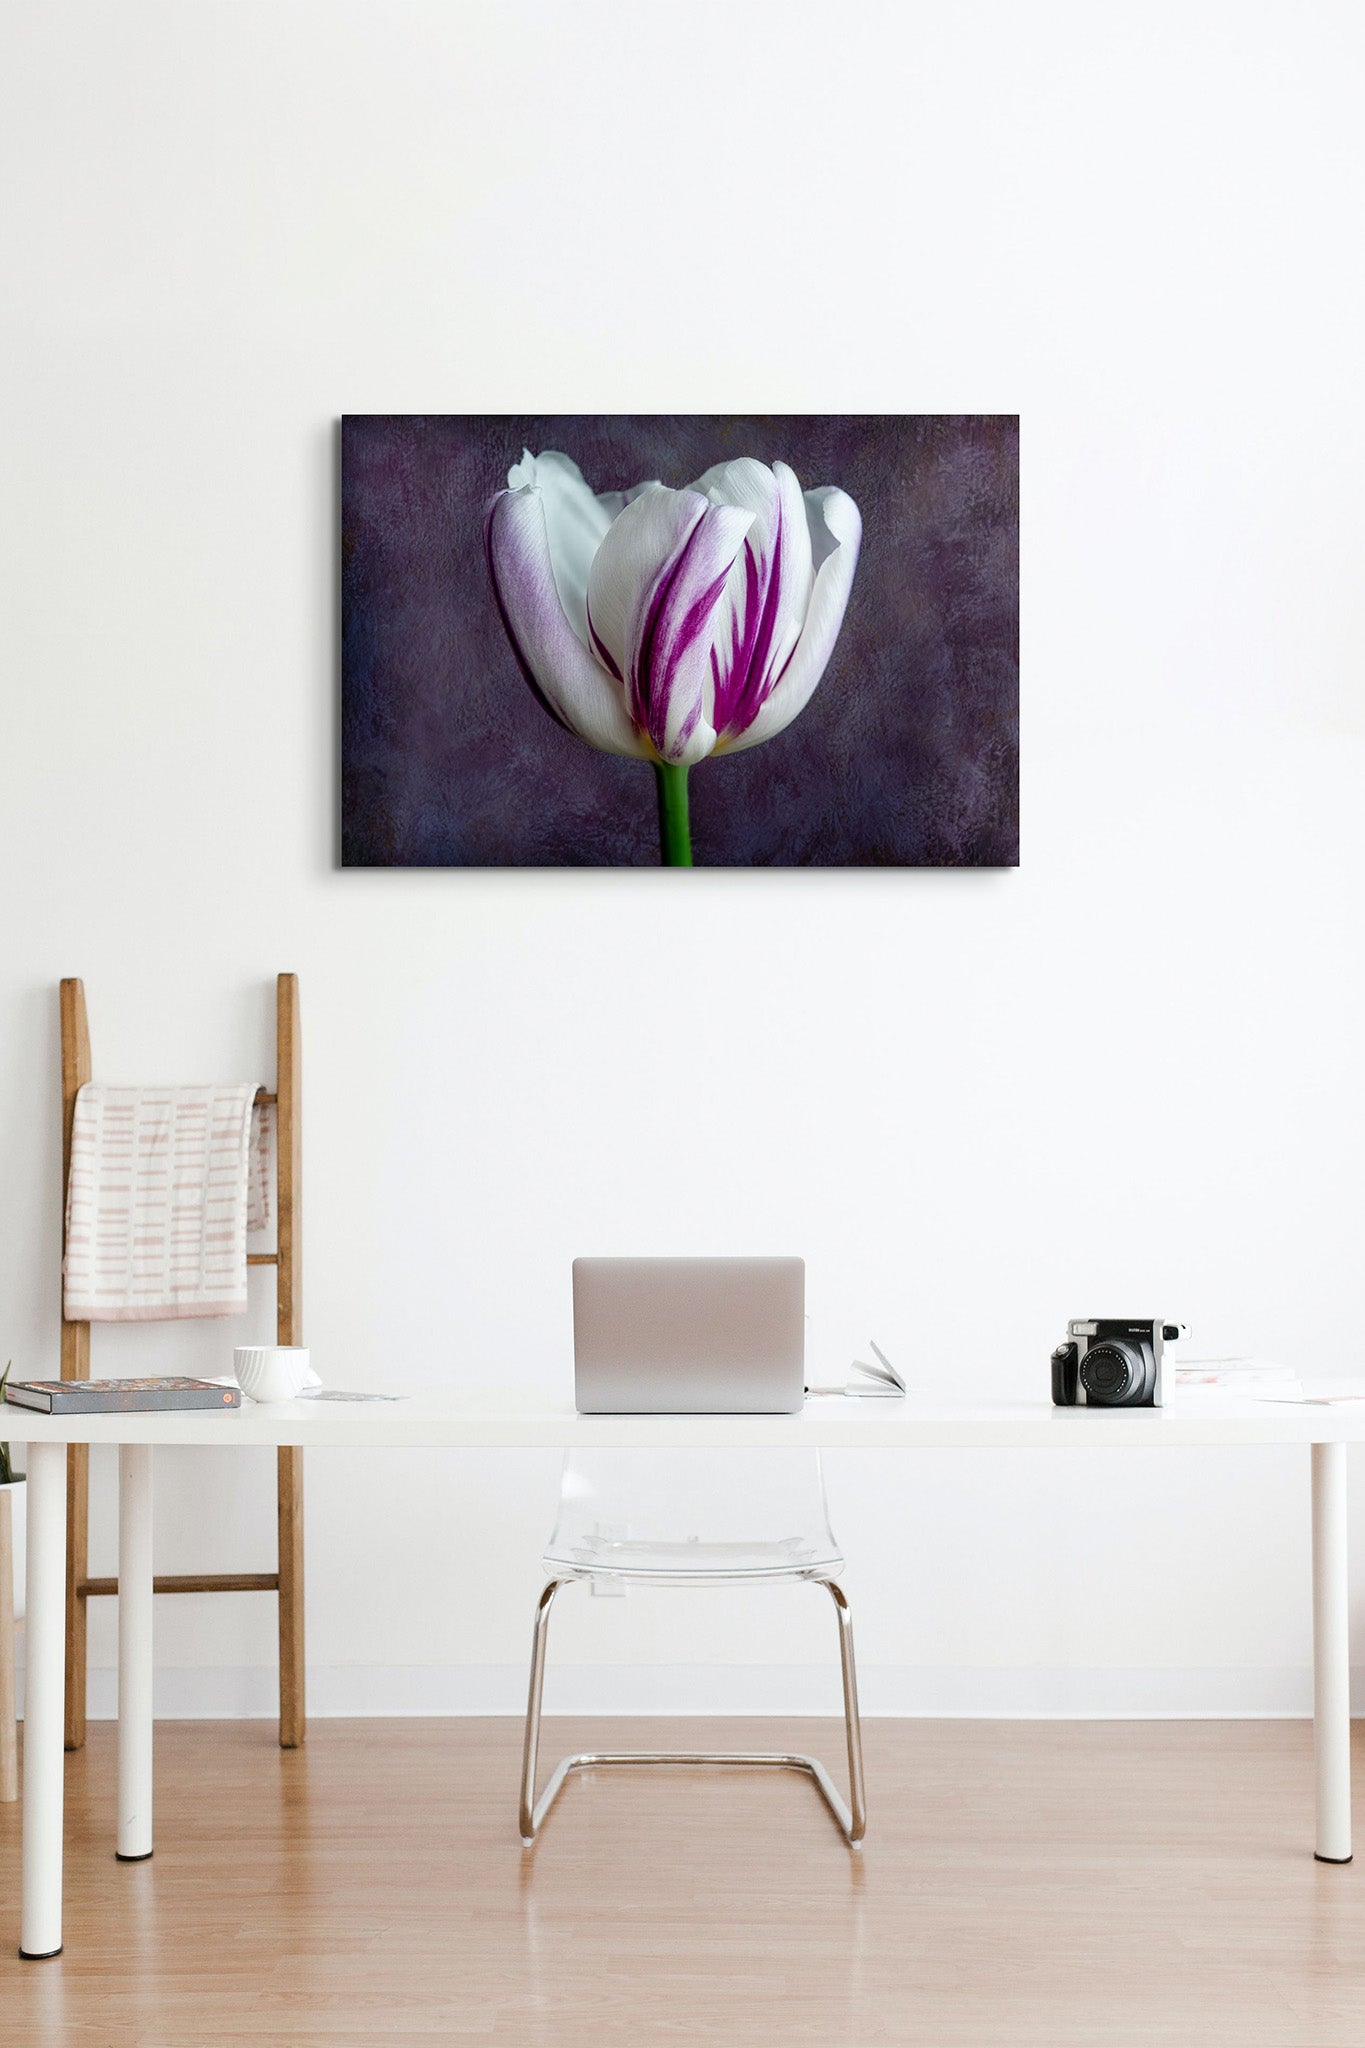 Picture hanging on the wall of an office. There is a desk with a laptop on it. The picture is a fine art flower photograph of a single tulip titled "Audrey" by Cameron Dreaux of Dreaux Fine Art. 